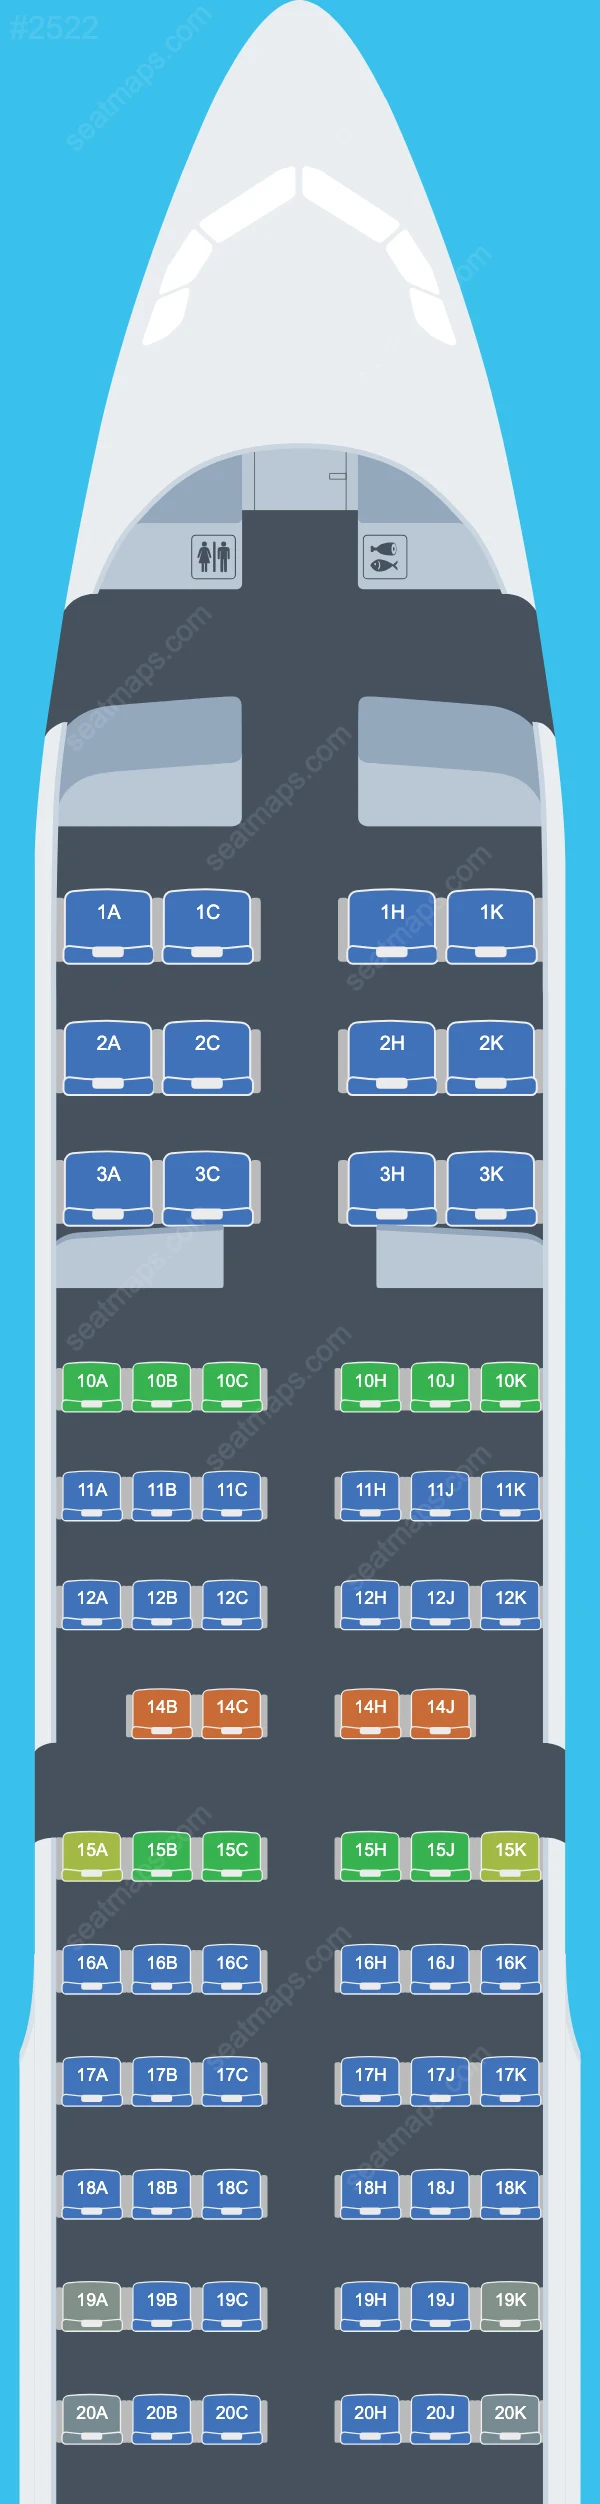 Asiana Airlines Airbus A321-200 V.1 seatmap mobile preview